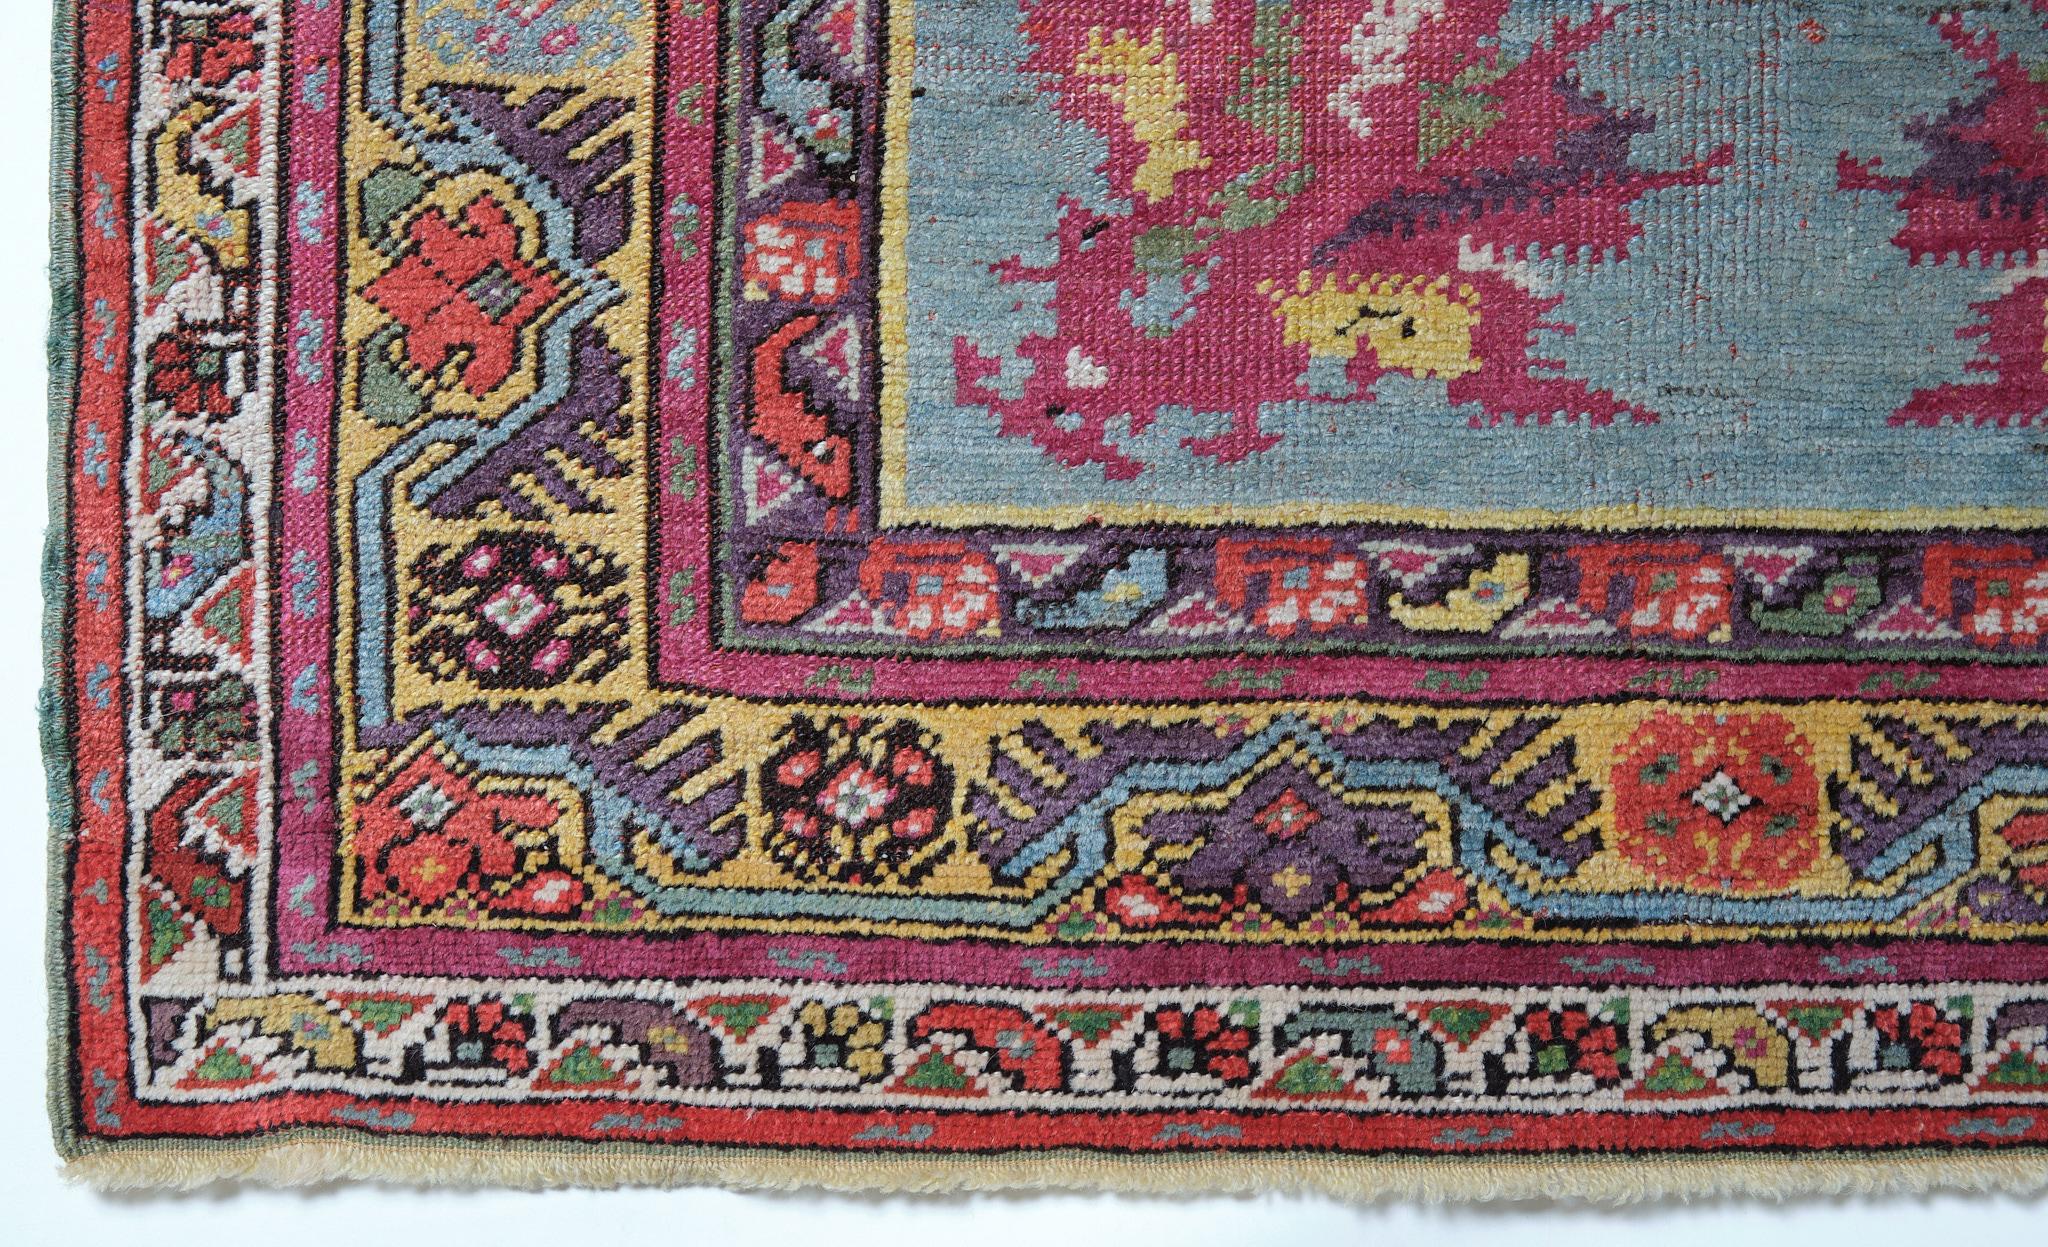 This is an antique Mucur Rug from Central Anatolia, the Kirsehir region with a floral pattern, good condition, and beautiful color composition. 

The town of Mudjar (or Mucur) is about twenty miles southeast of Kirsehir. The area has a long